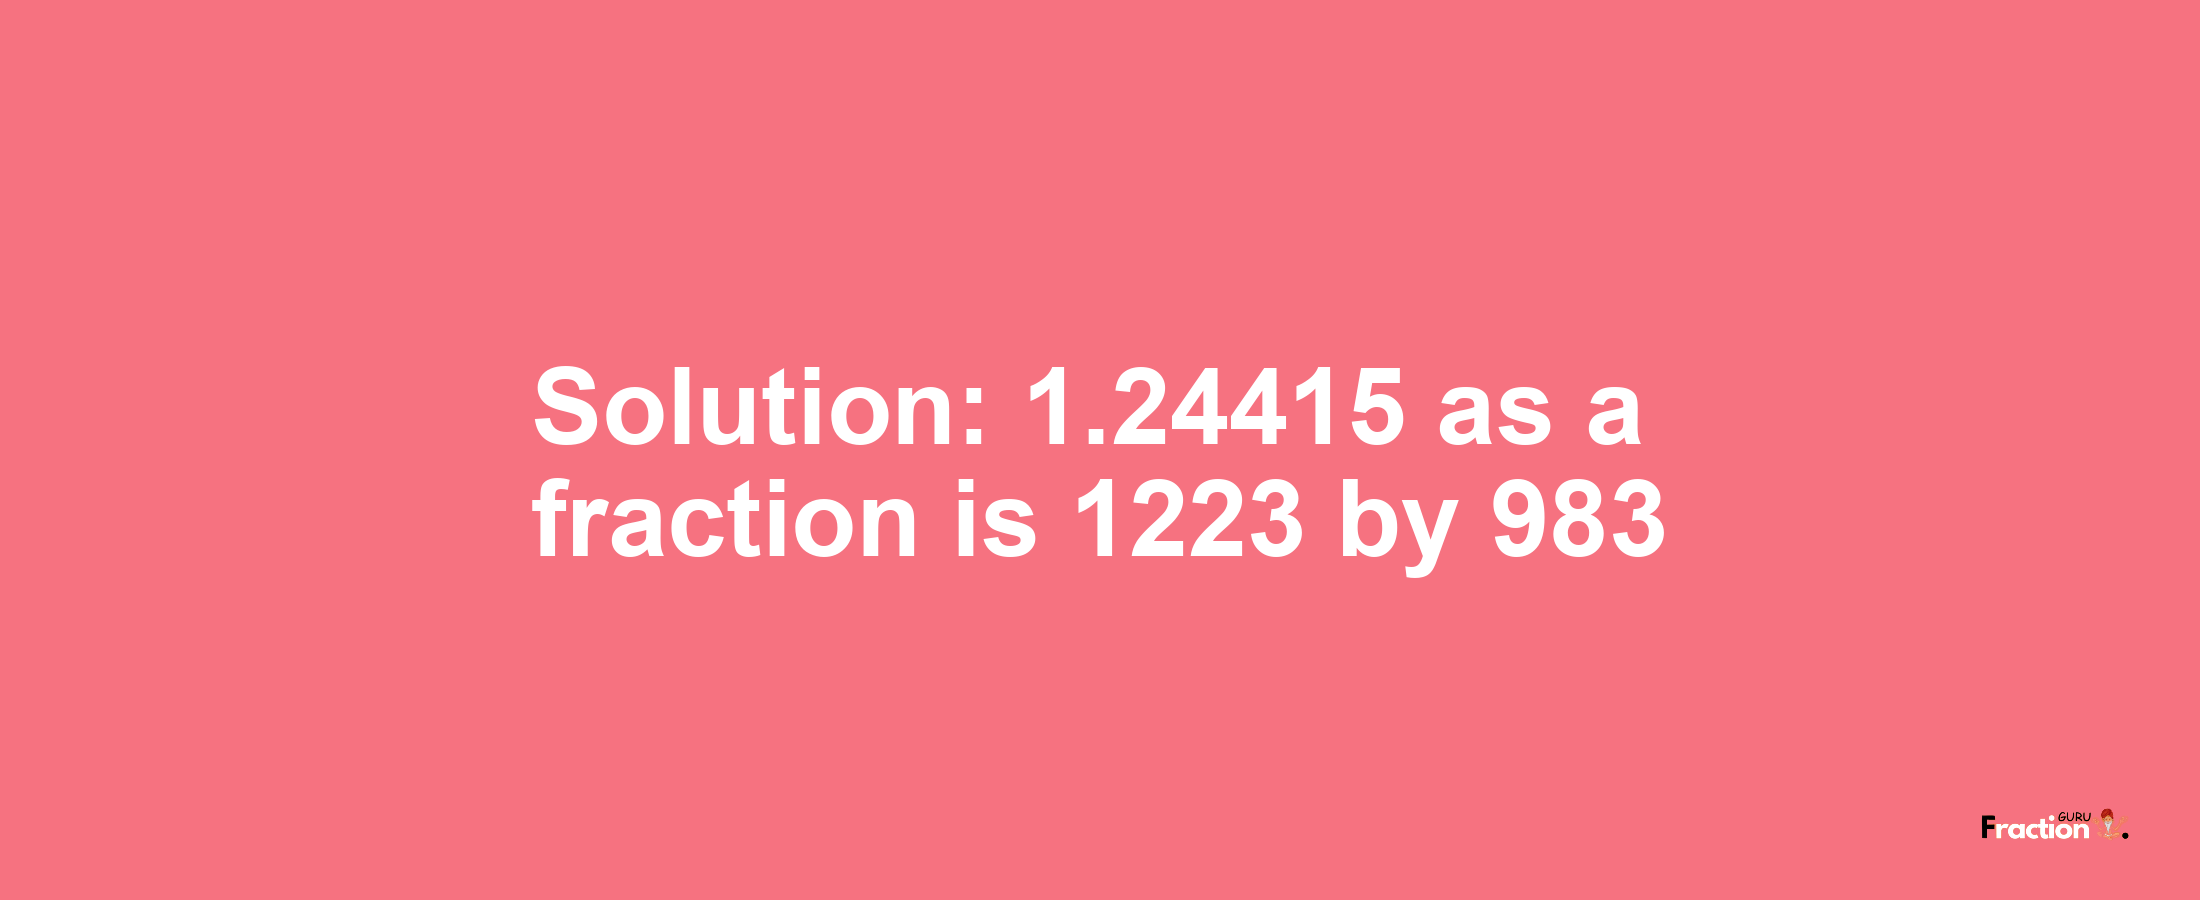 Solution:1.24415 as a fraction is 1223/983